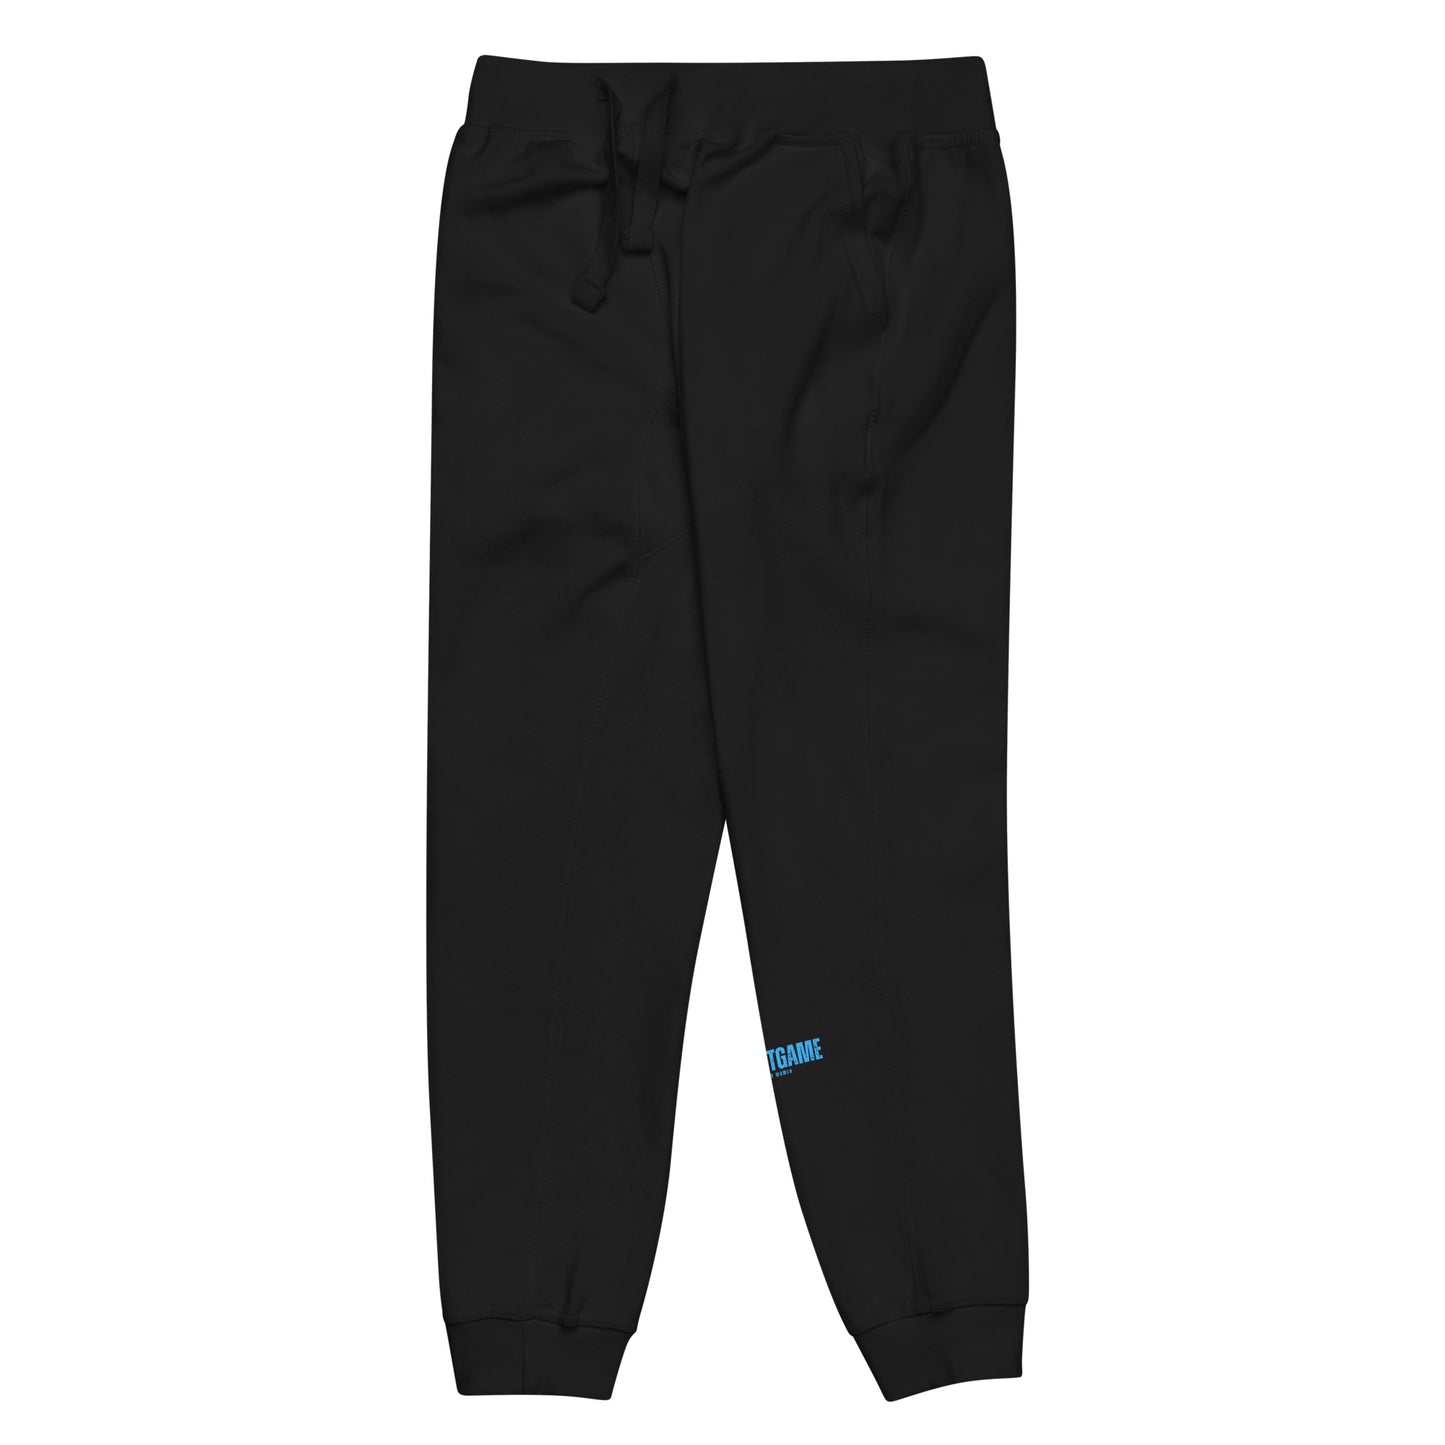 Sh3gotgame Sky Blue label Joggers